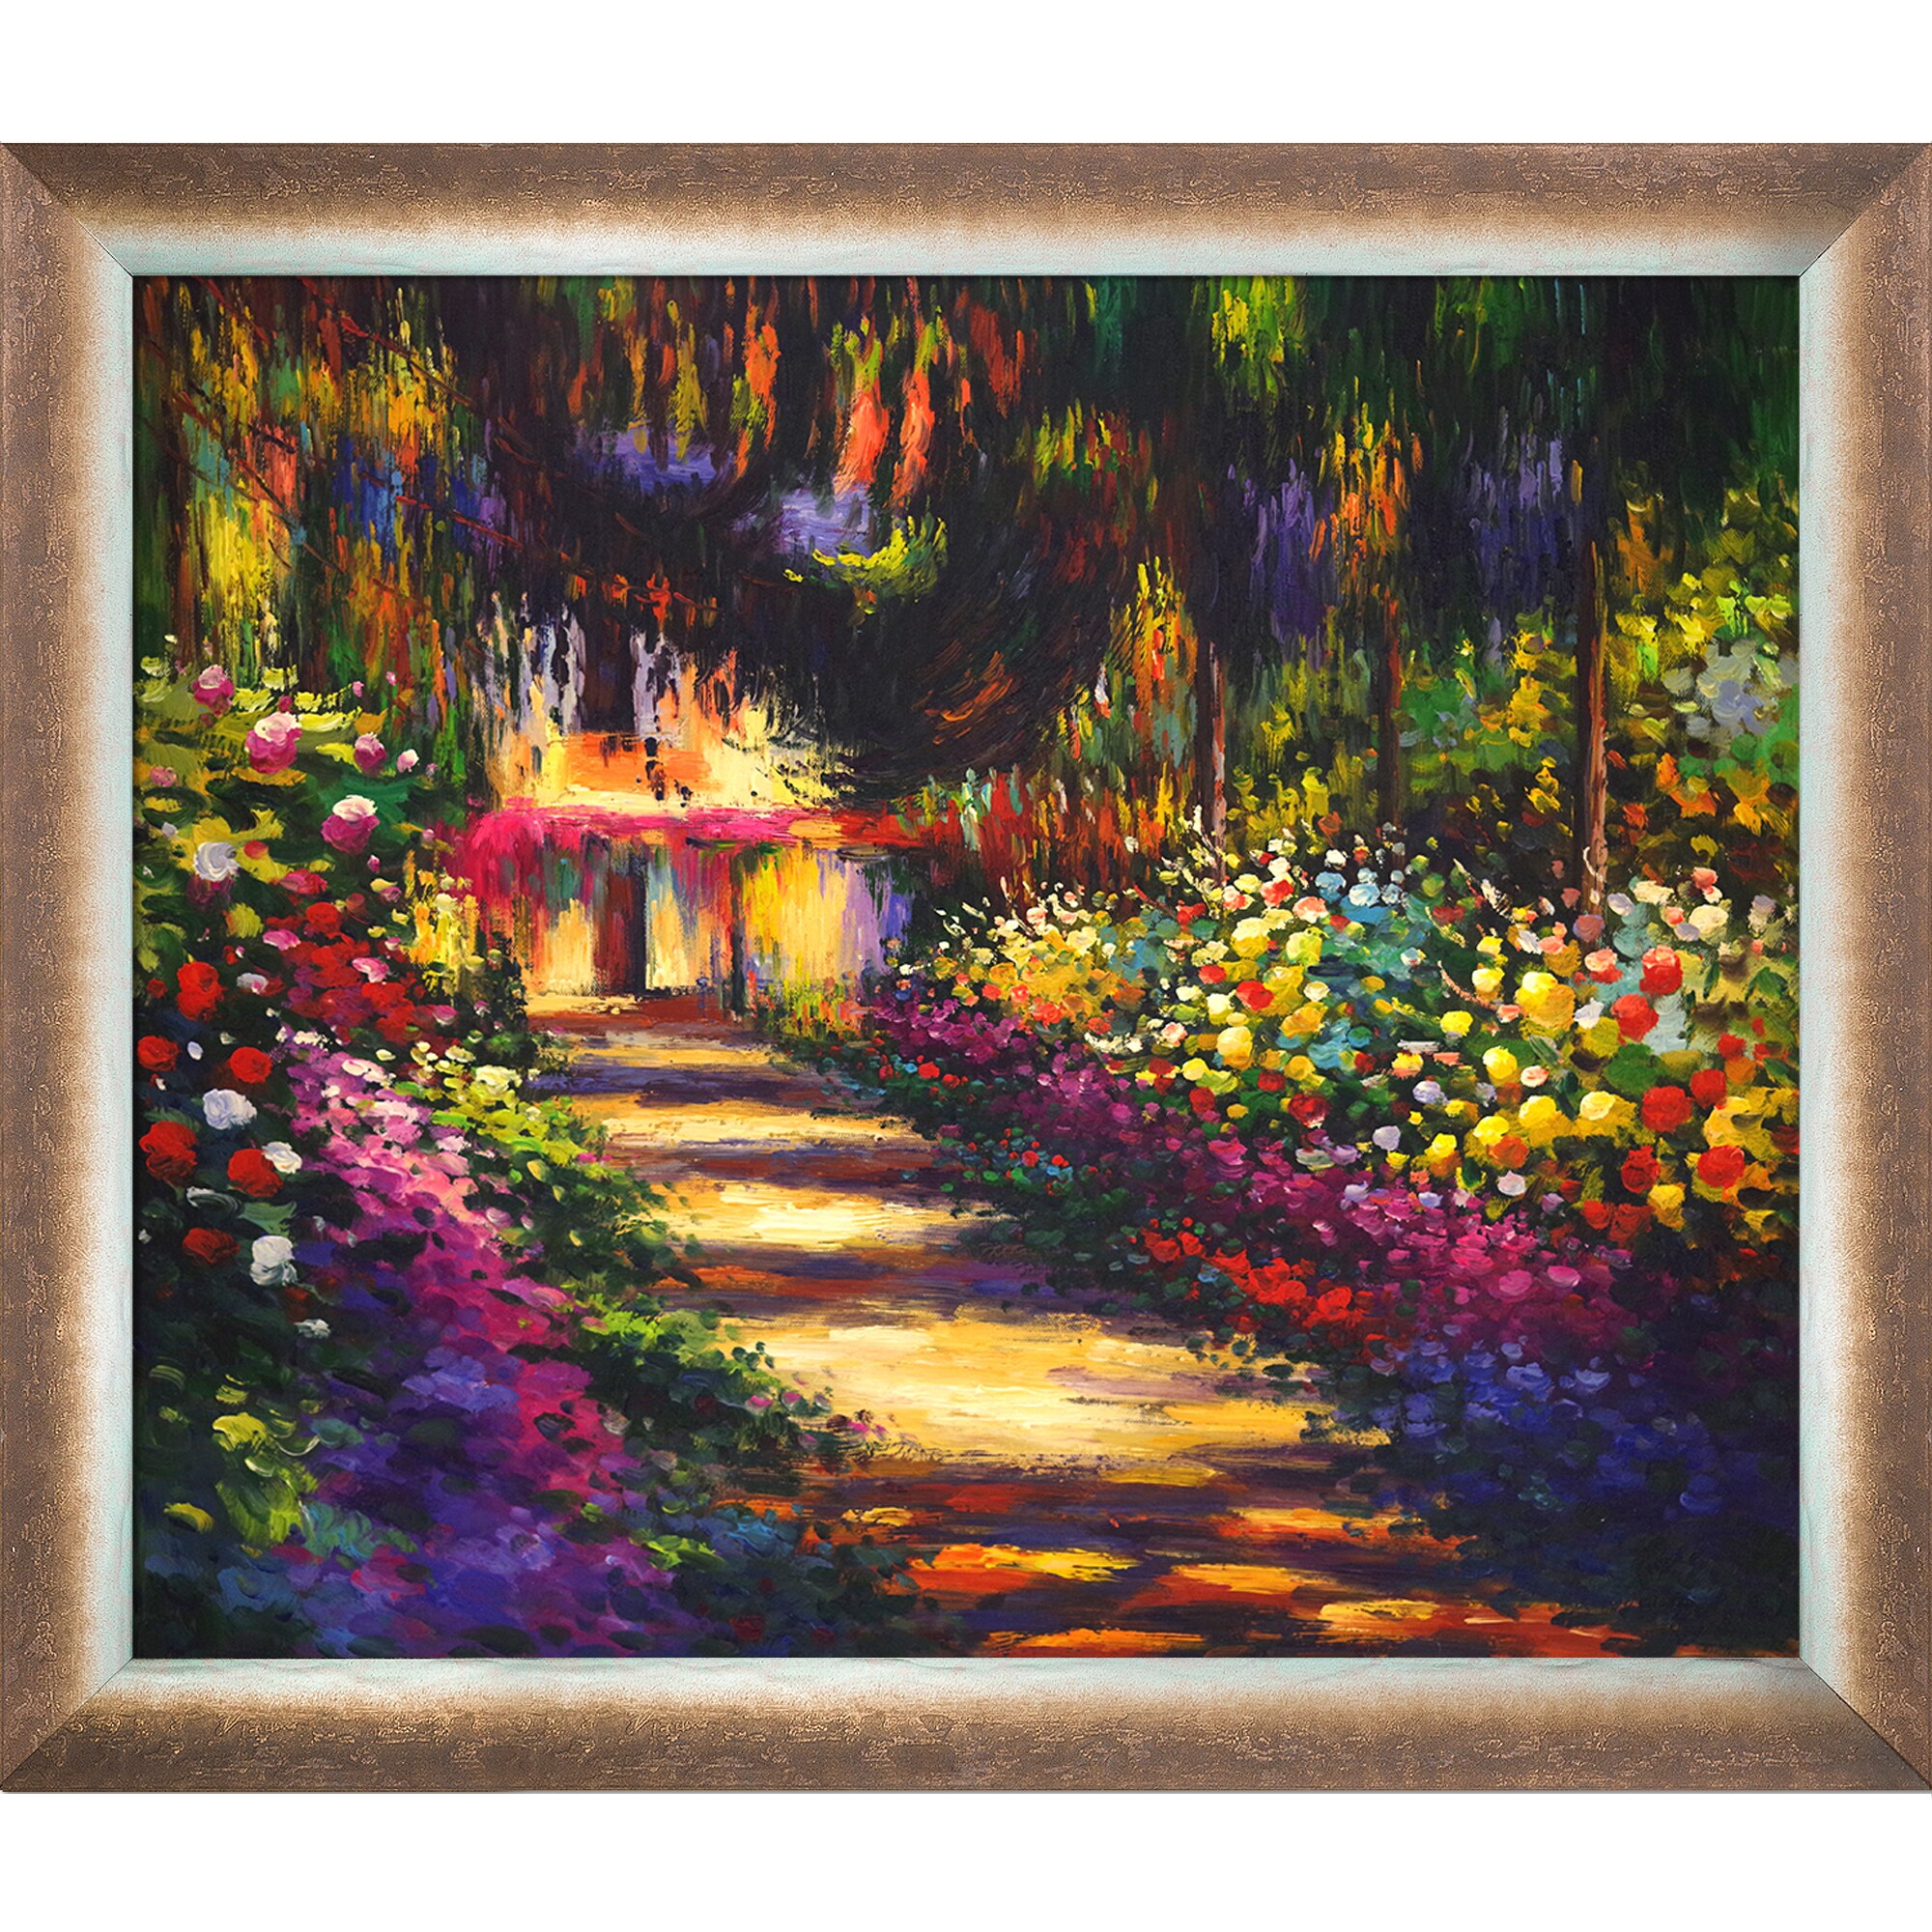 Pathway in monet's garden at giverny Wall Art at Lowes.com